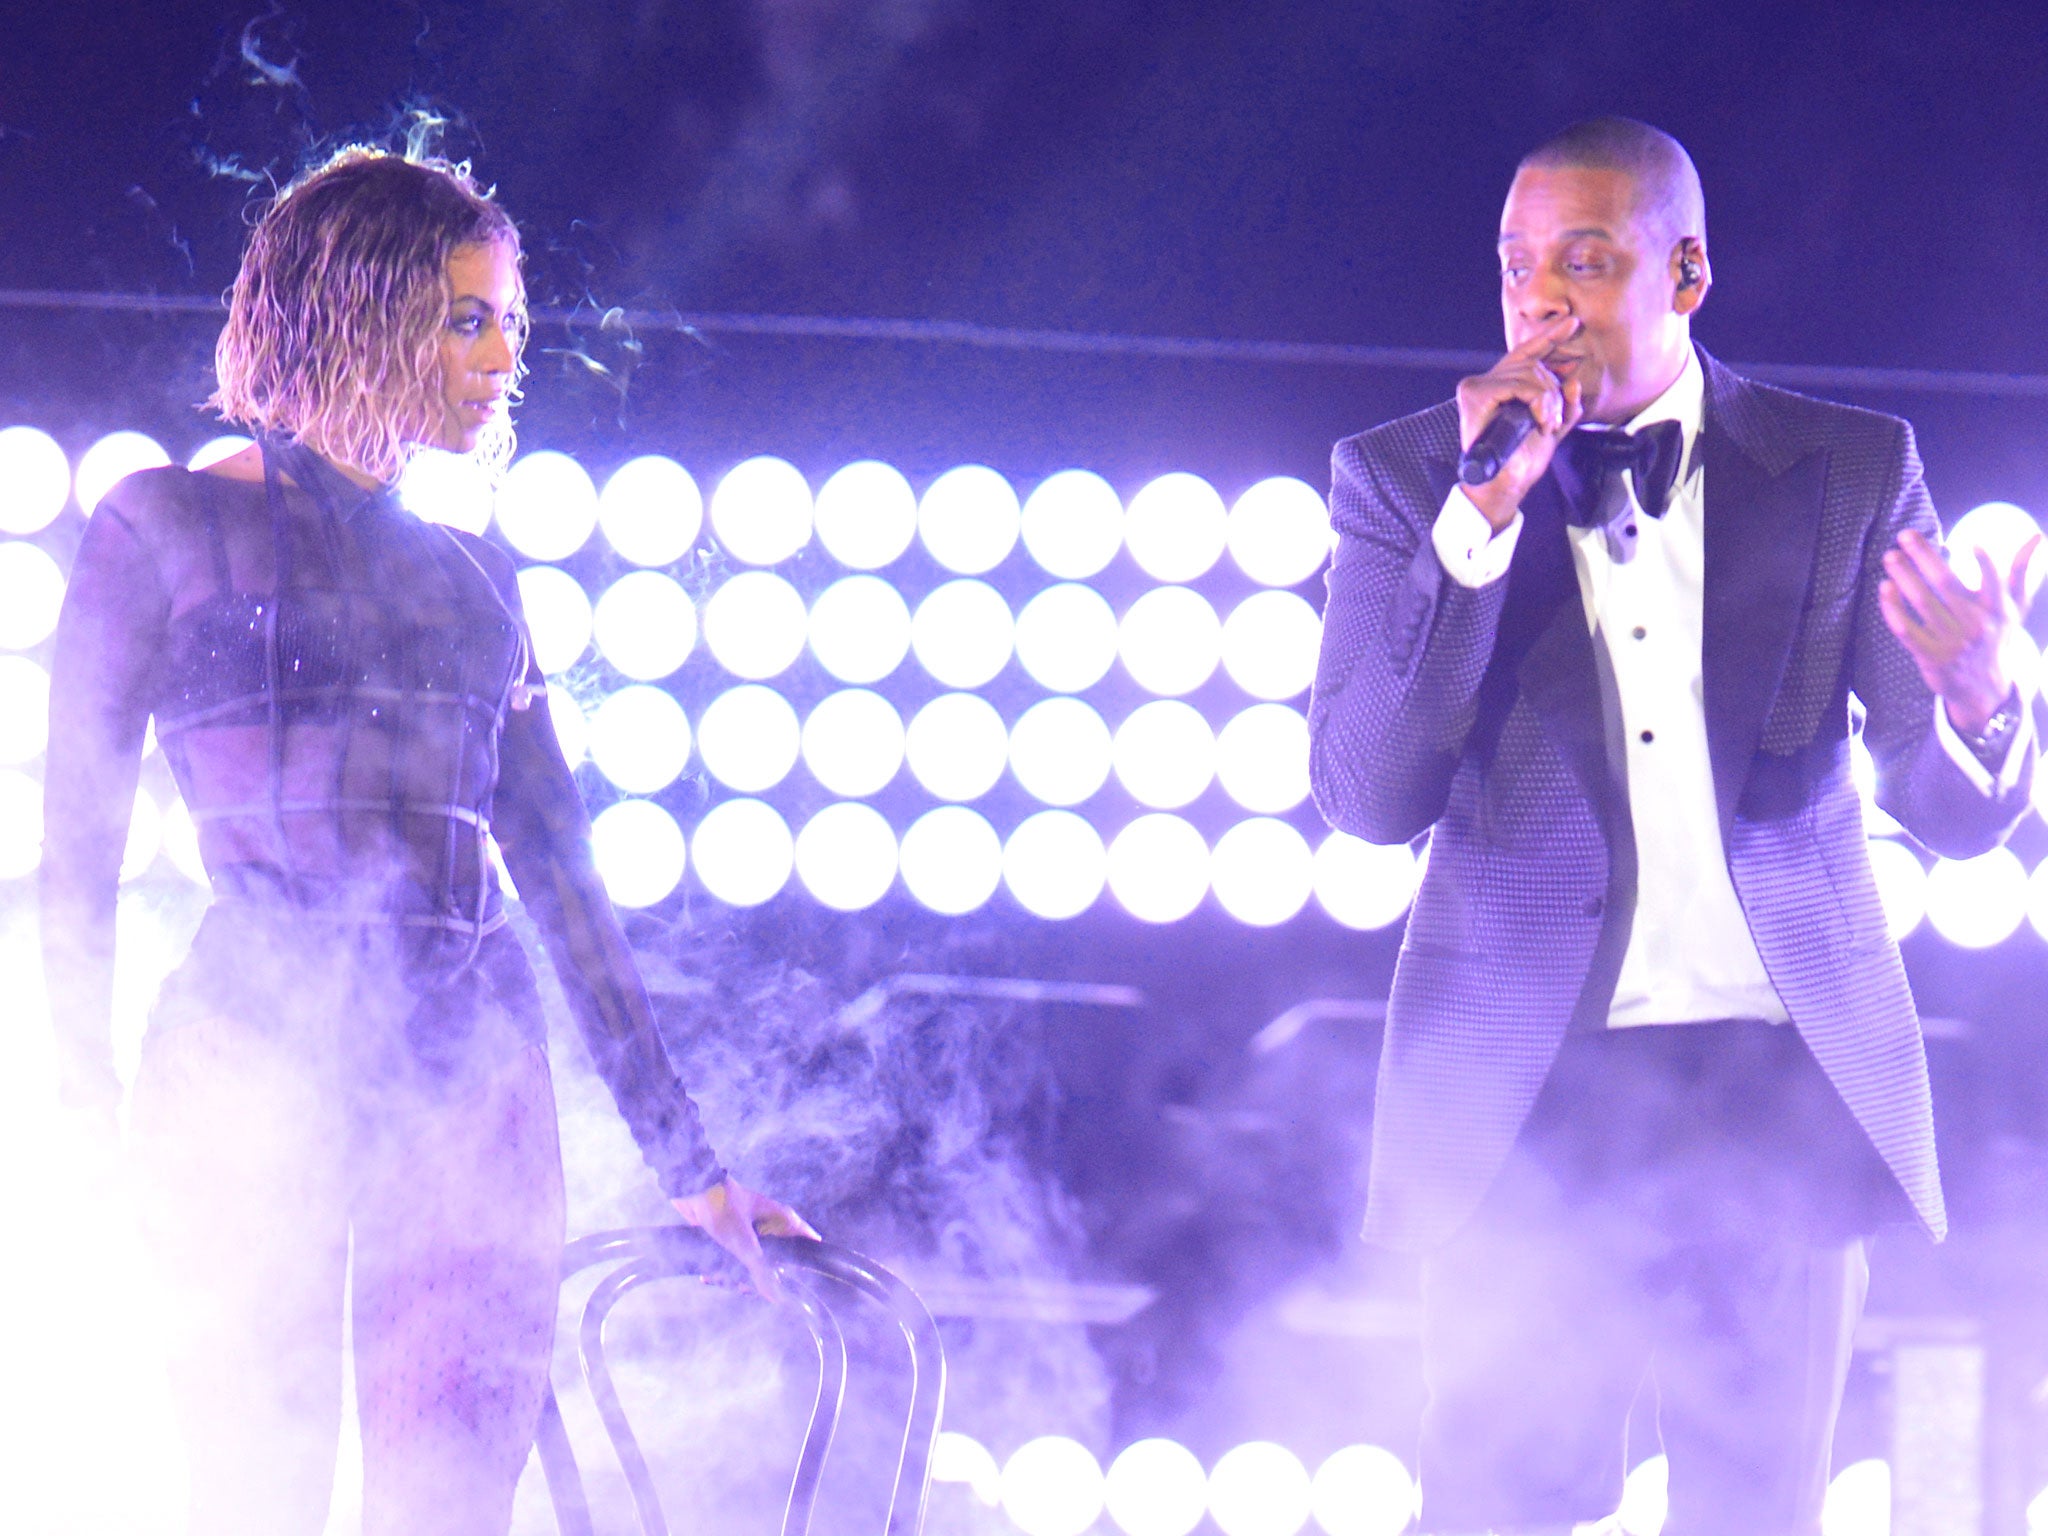 Beyonce and Jay-Z perform 'Drunk in Love' at the 56th annual Grammy Awards at Staples Center in Los Angeles